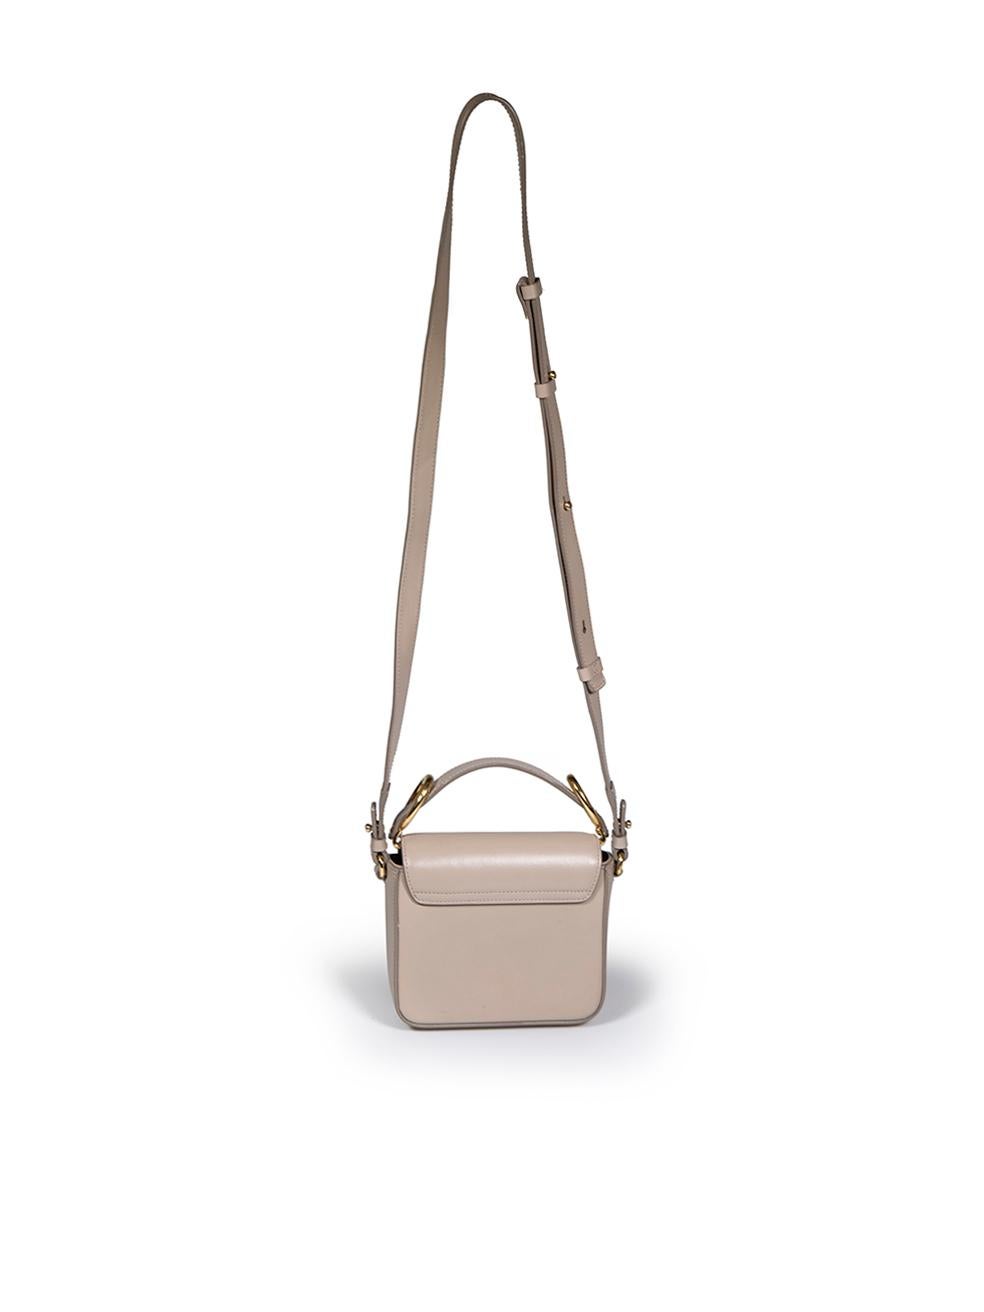 Chloé Taupe Calfskin Mini C Crossbody Bag In Good Condition For Sale In London, GB